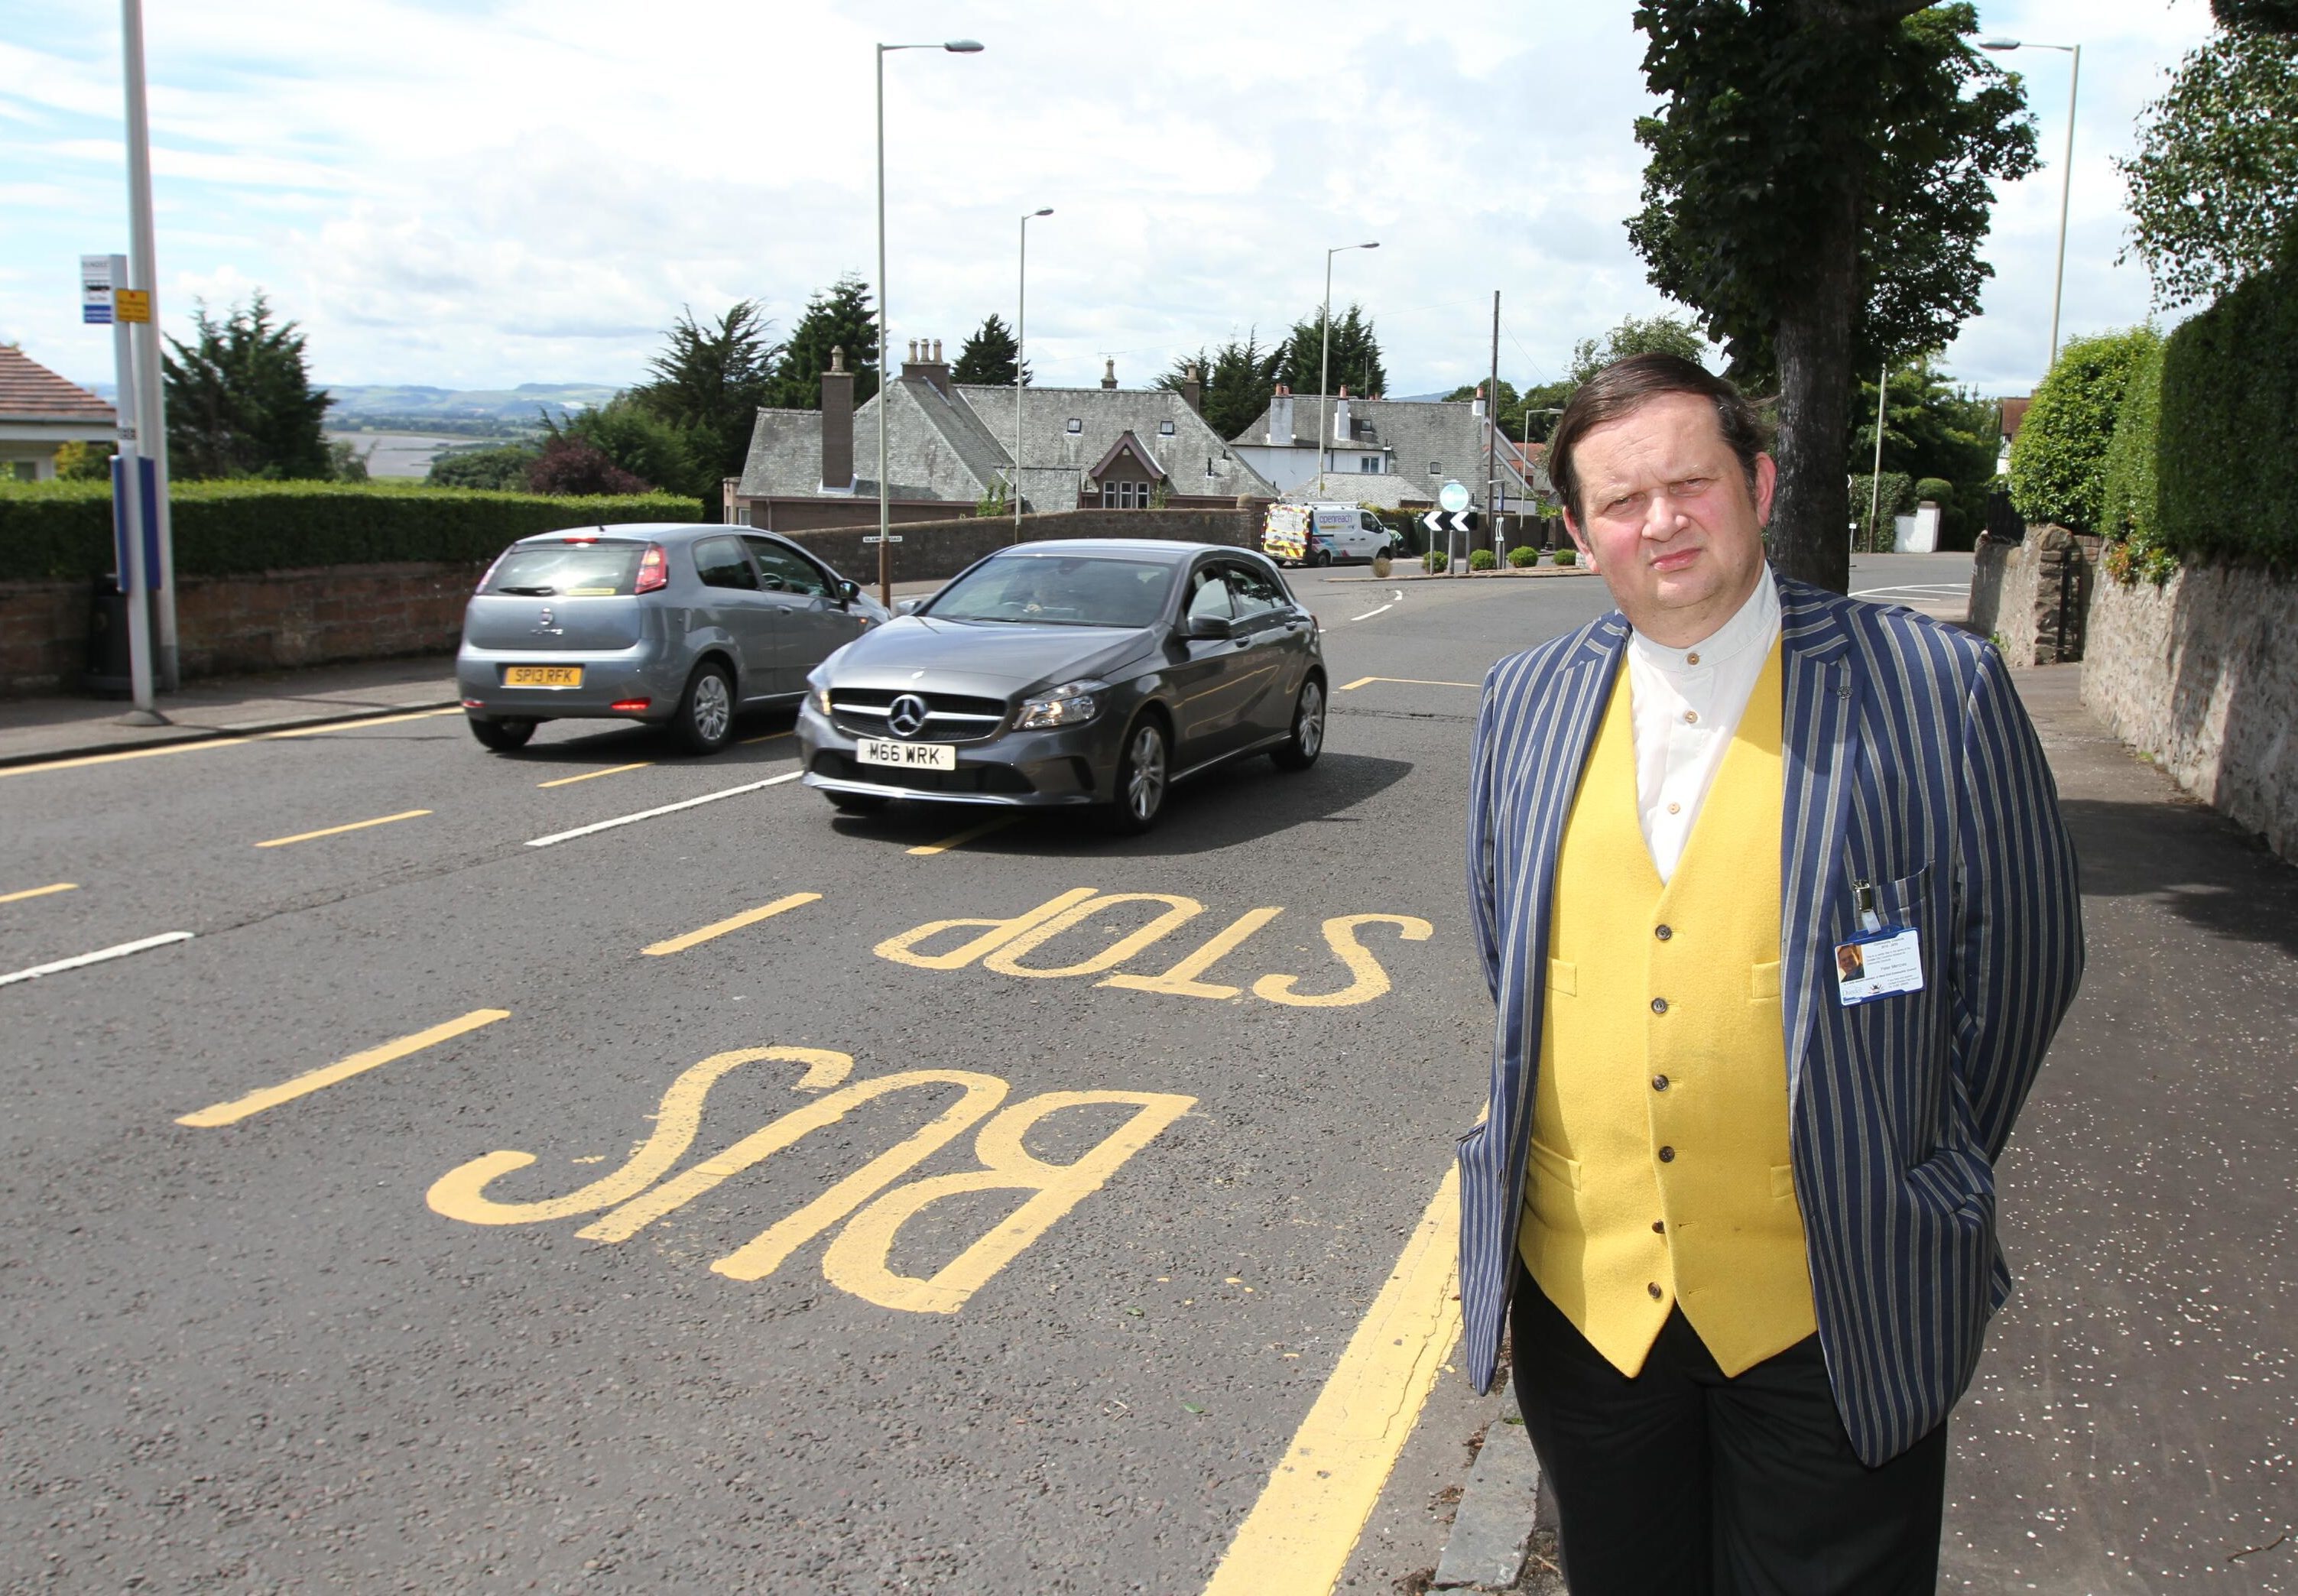 West End Community Council chair Peter Menzies pictured on Blackness Road, an area which could benefit under the new brand proposals.